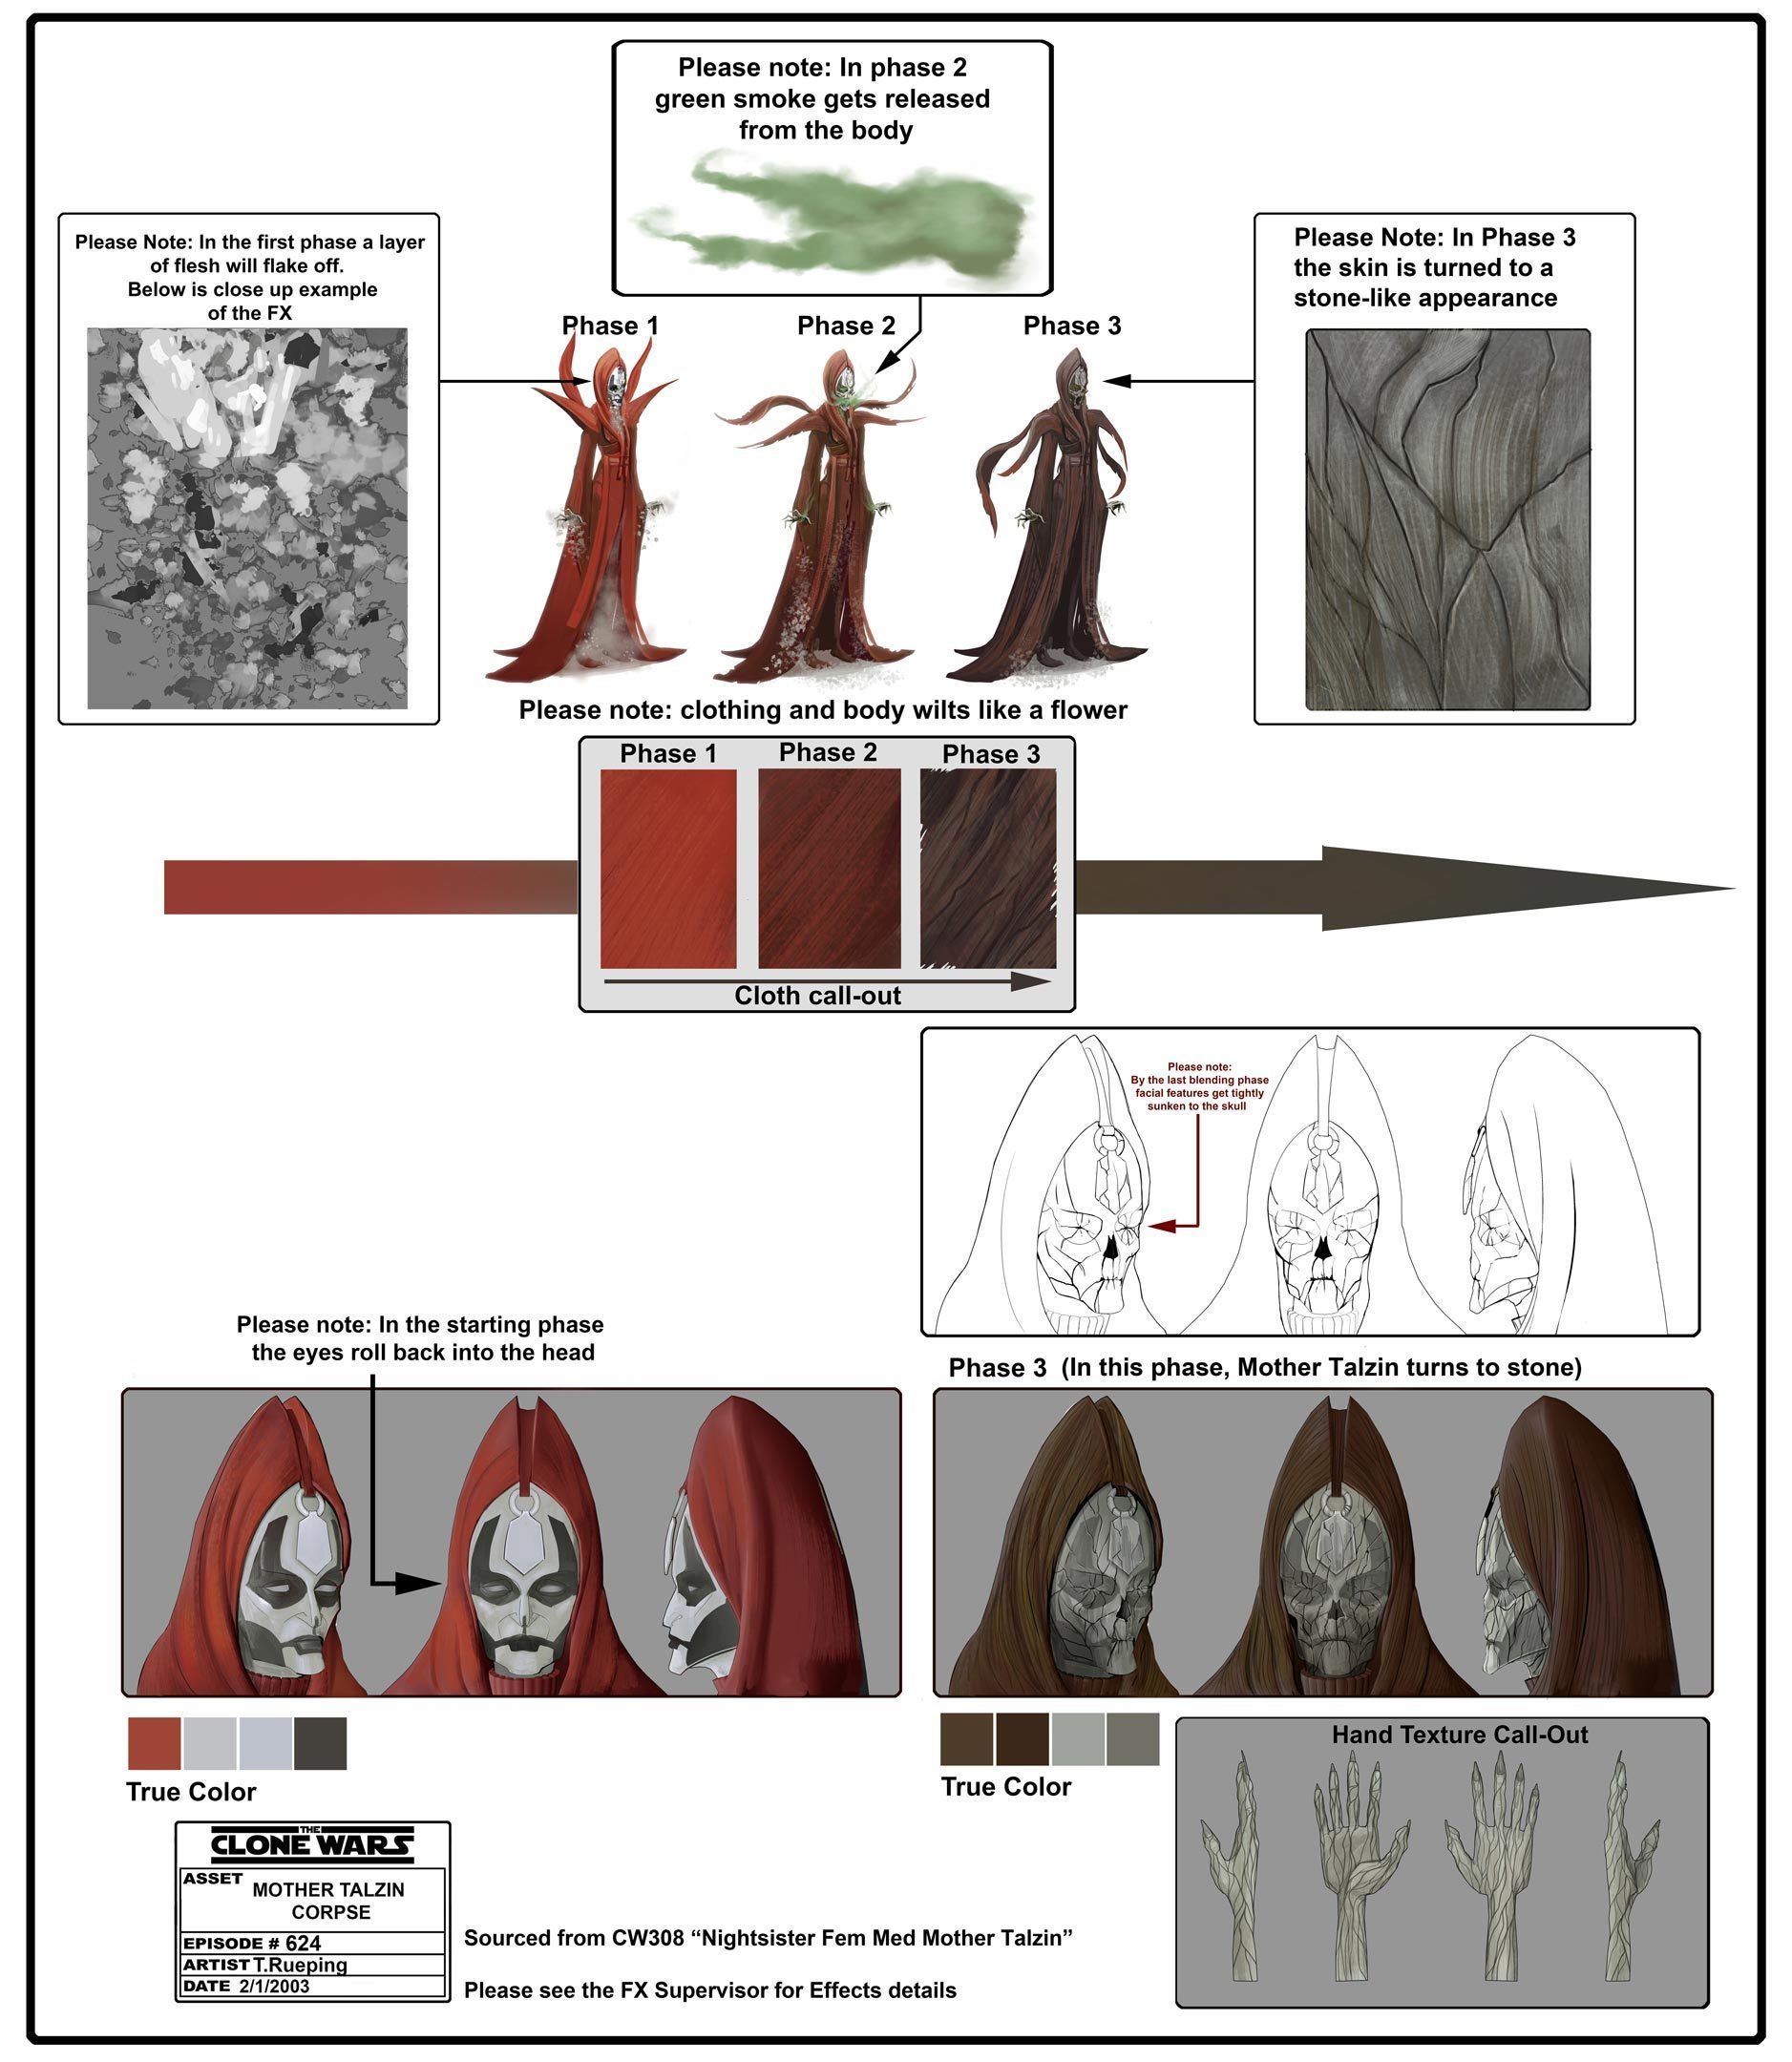 Concept art showing the stages of Mother Talzin's death by Tara Rueping, February 1, 2013.